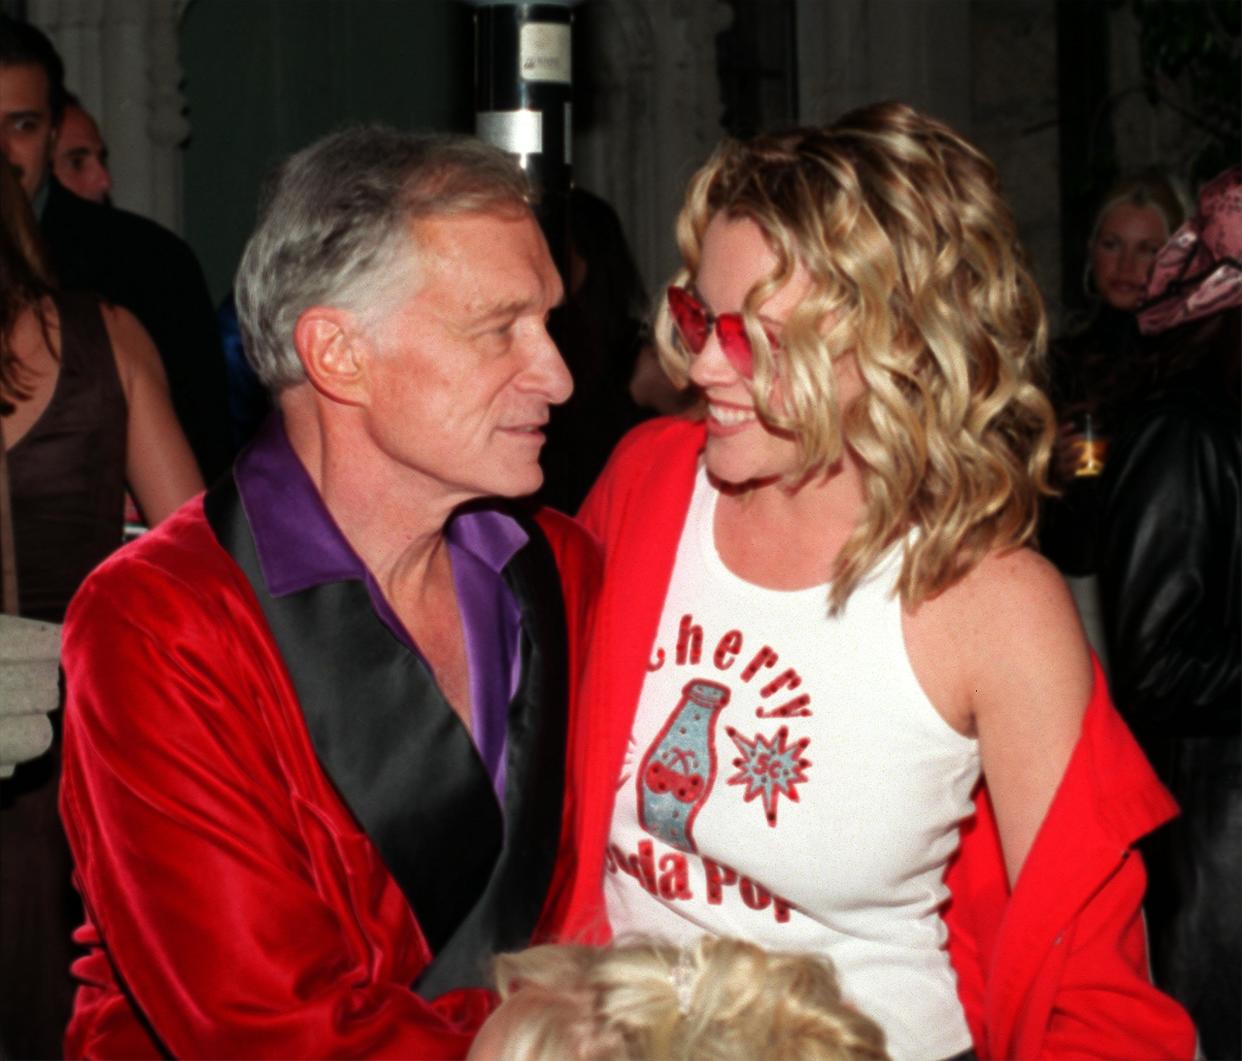 385637 03: Playboy founder Hugh Hefner and actress and former playmate Jenny McCarthy cuddle February 9, 2001 during the Playboy Valentine's Day party at the Playboy Mansion in Bel Air, CA. (Photo by Laurence Cottrell/Liaison)